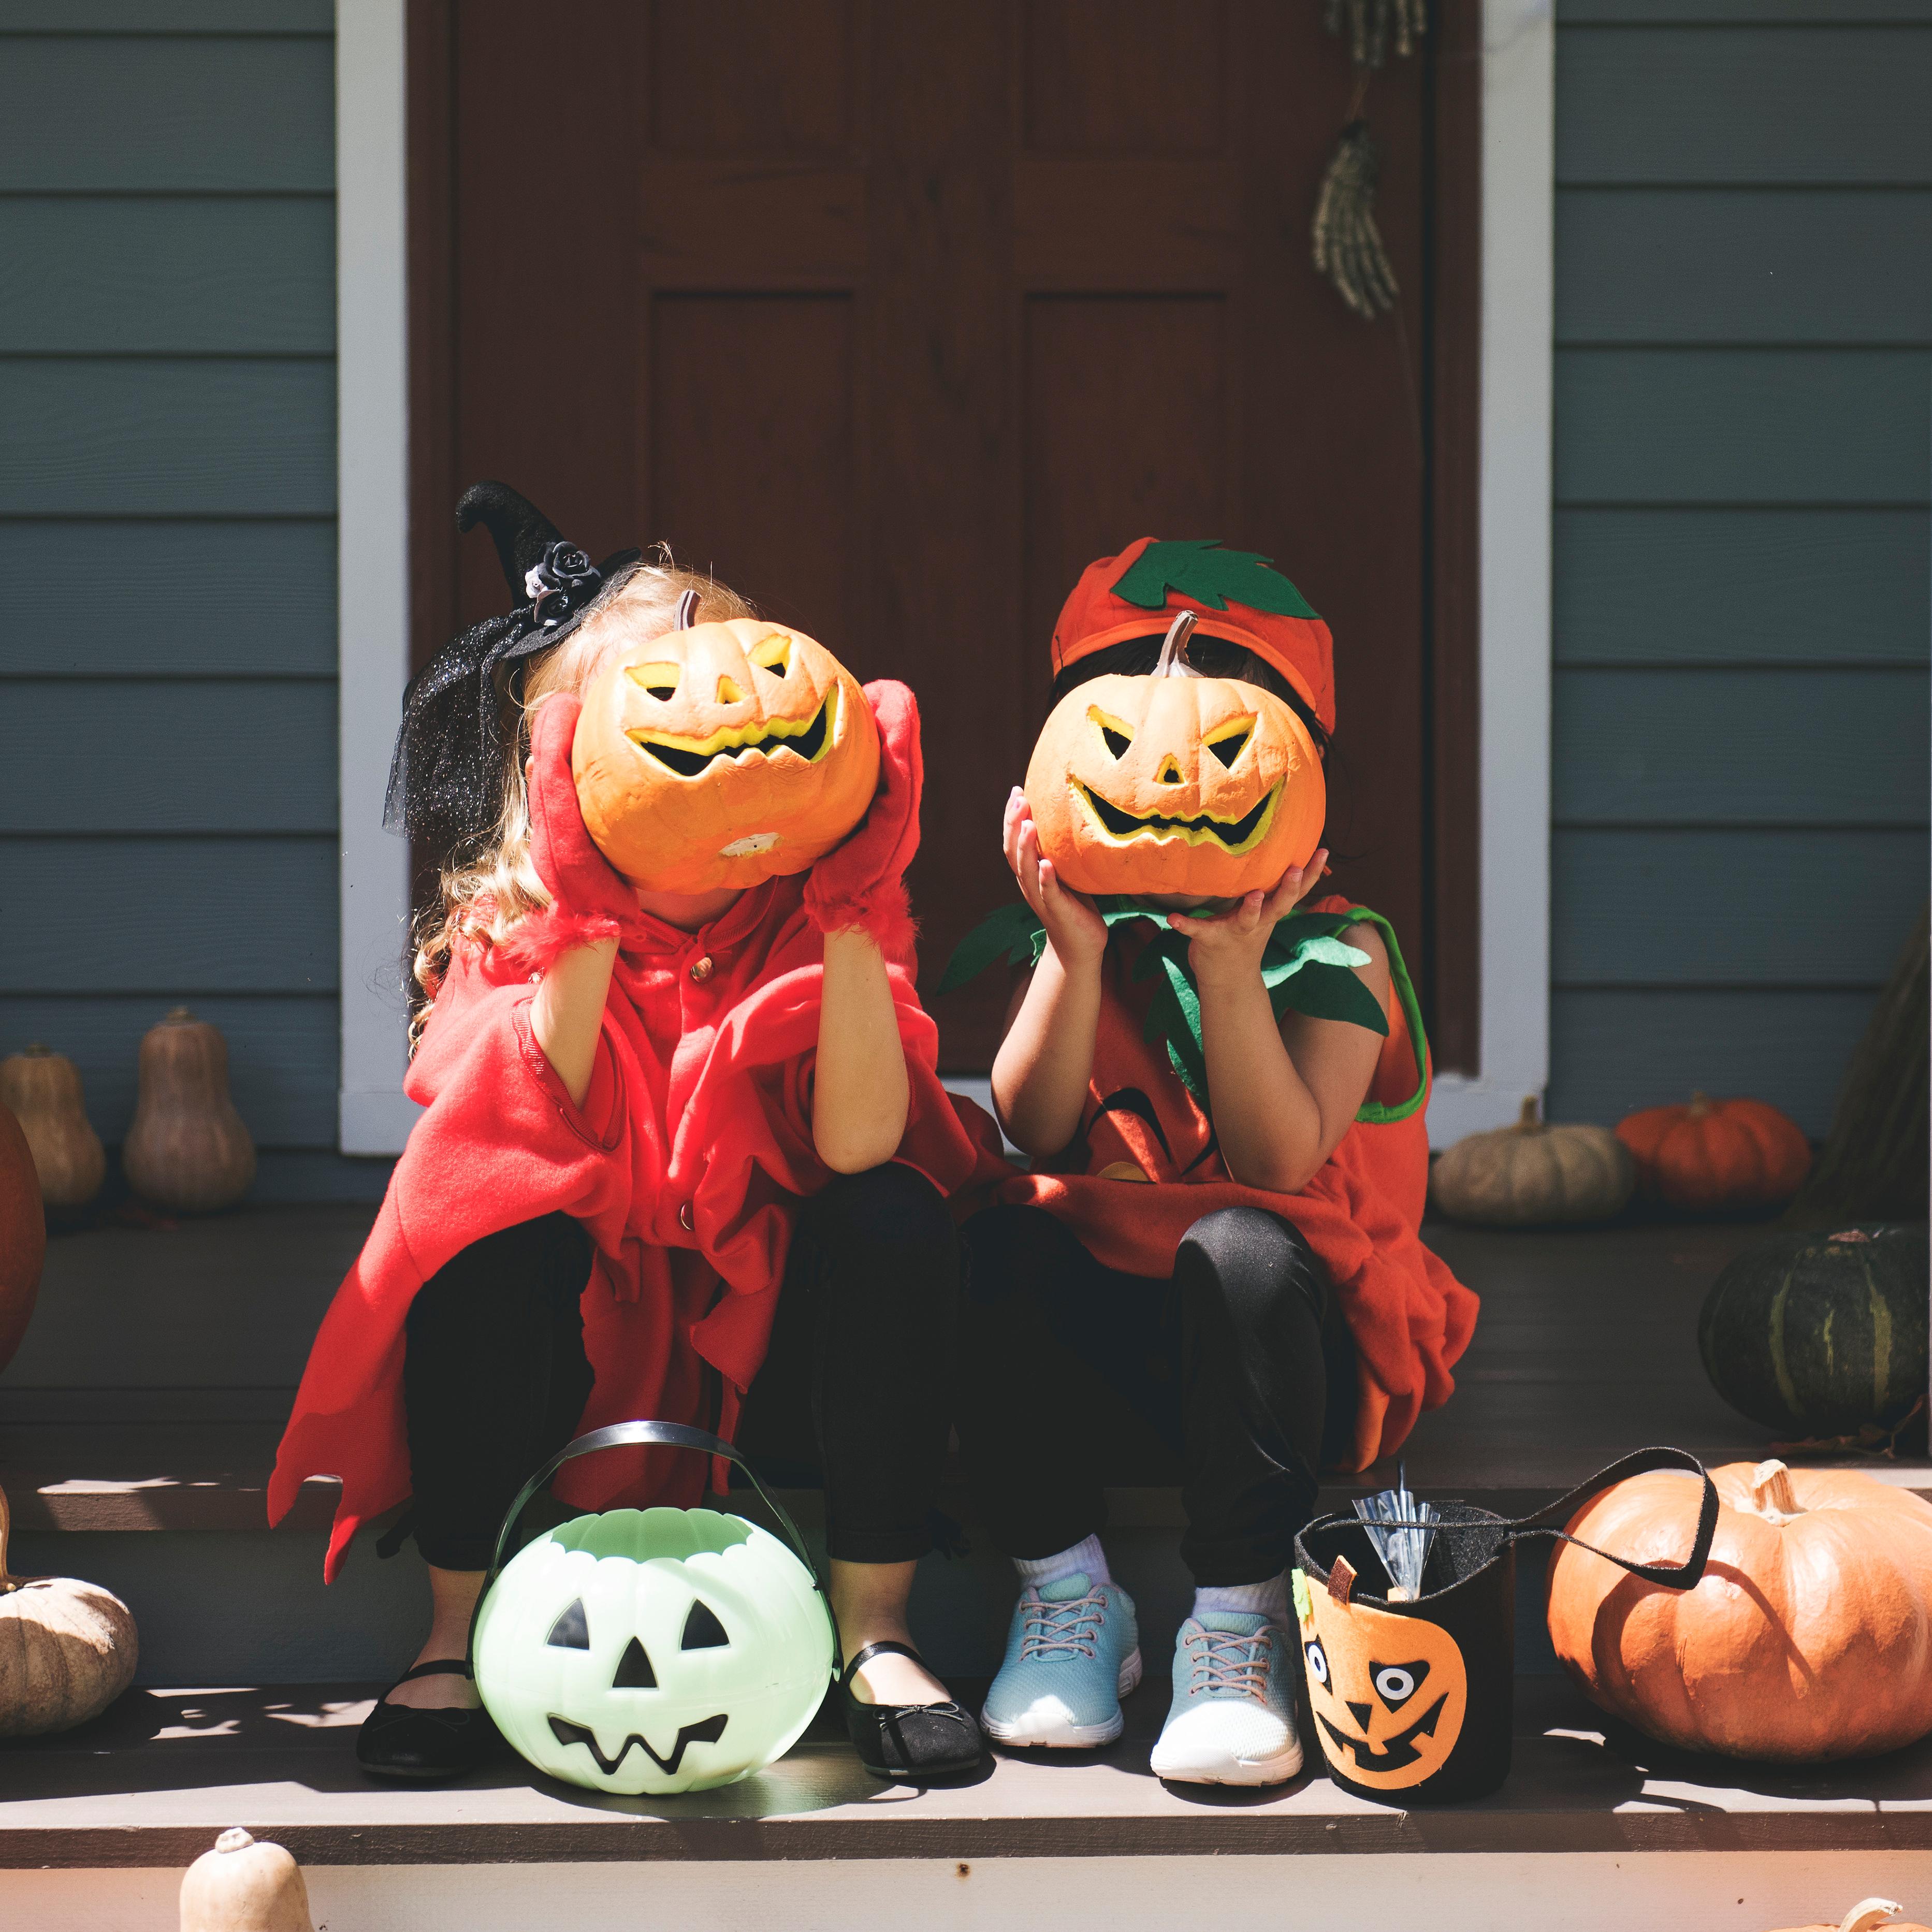 FRIGHTFULLY FUN IDEAS FOR YOUR BEST HALLOWEEN BASH YET